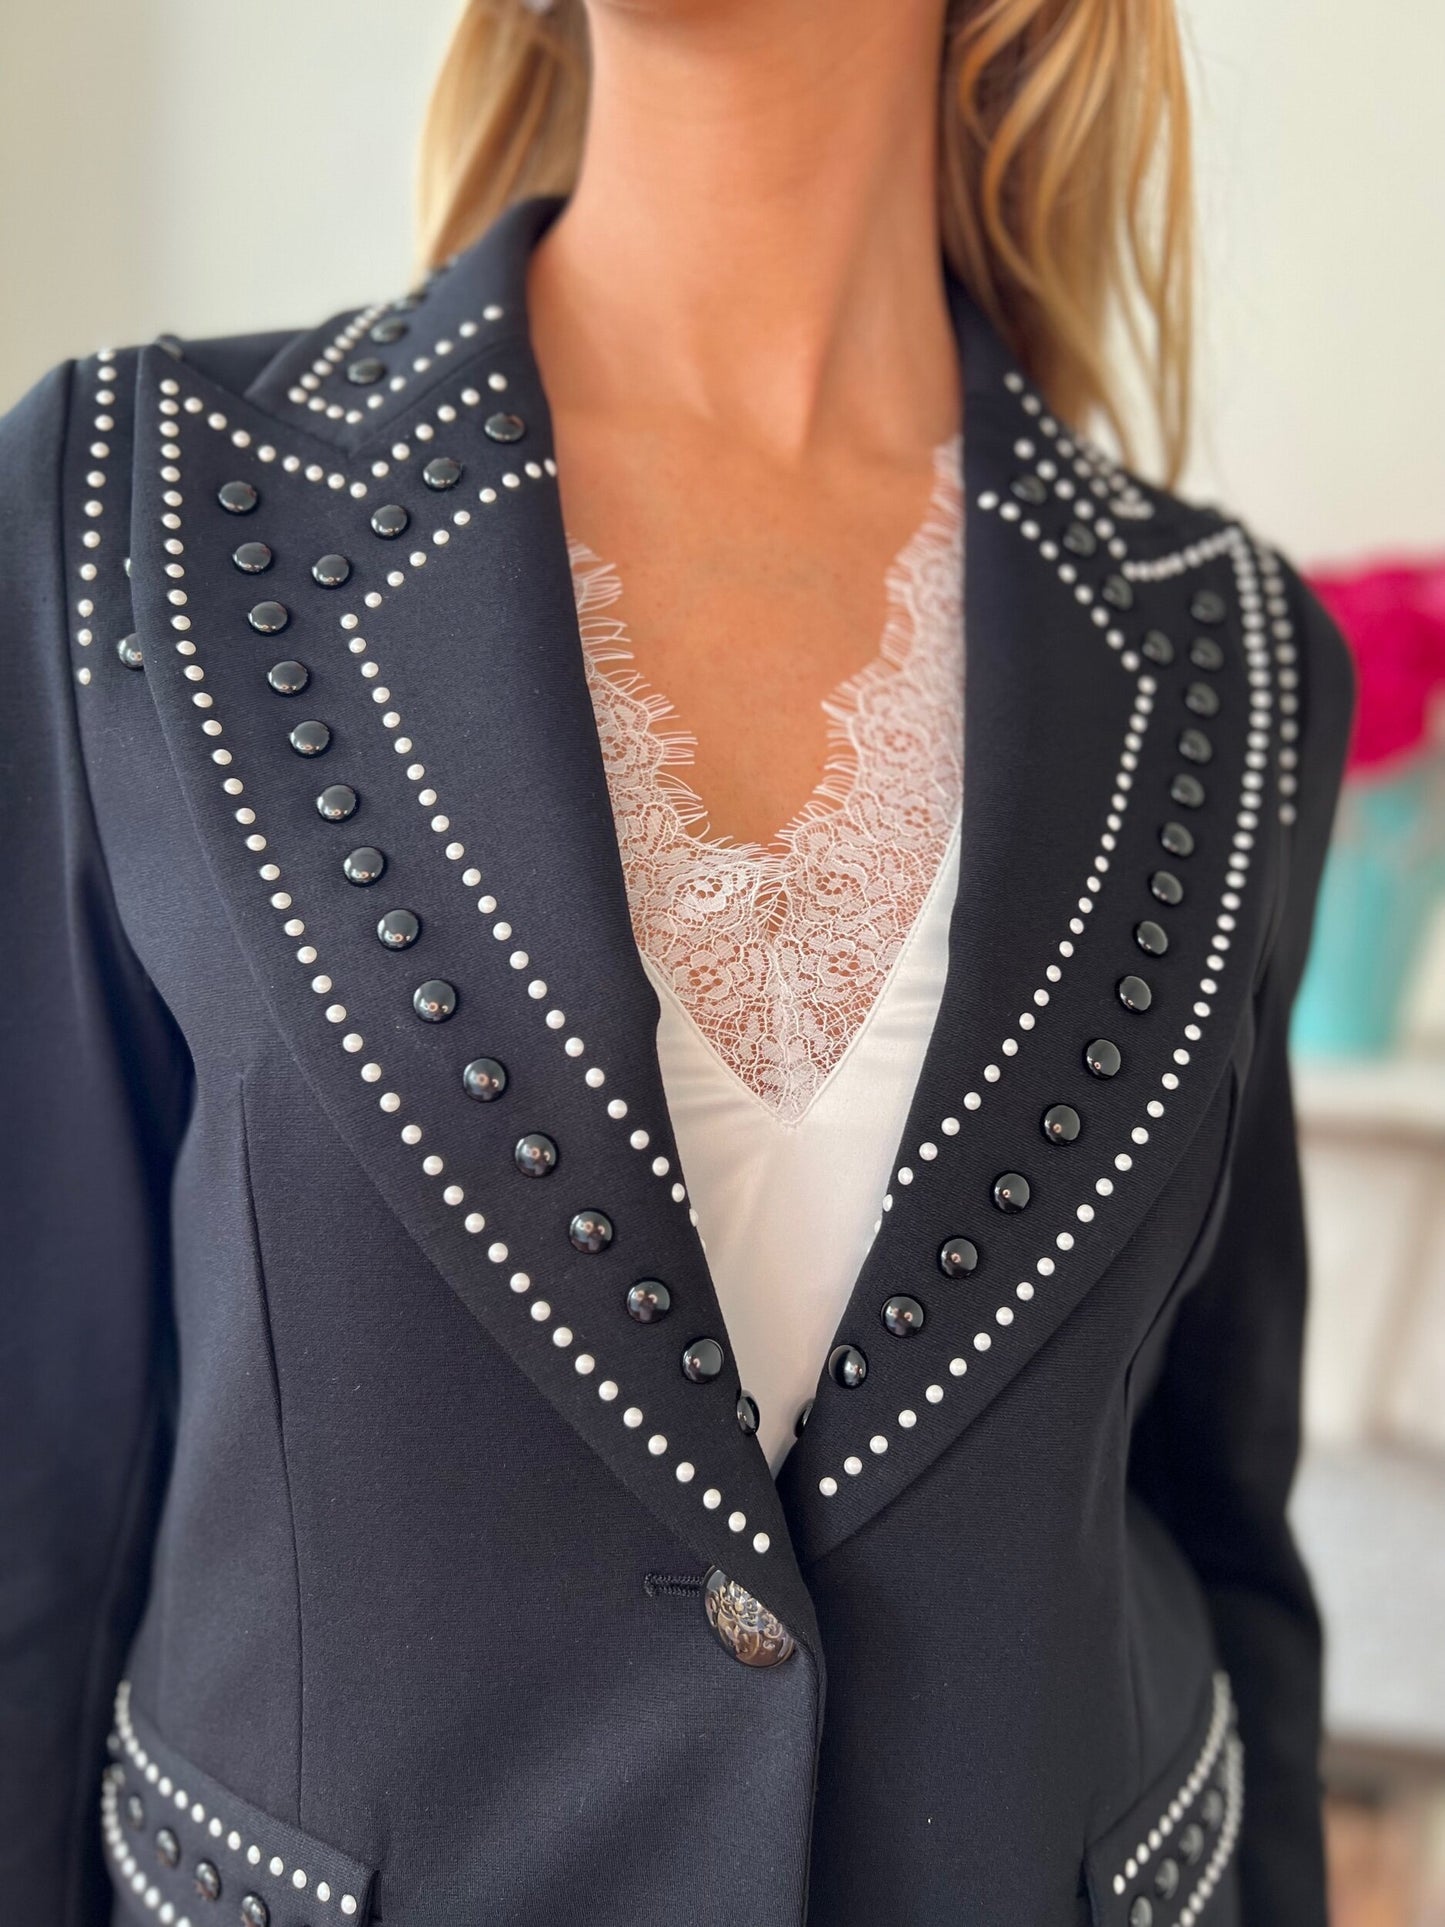 Florencia Tailored Black Jacket with White and Black Stud Detail